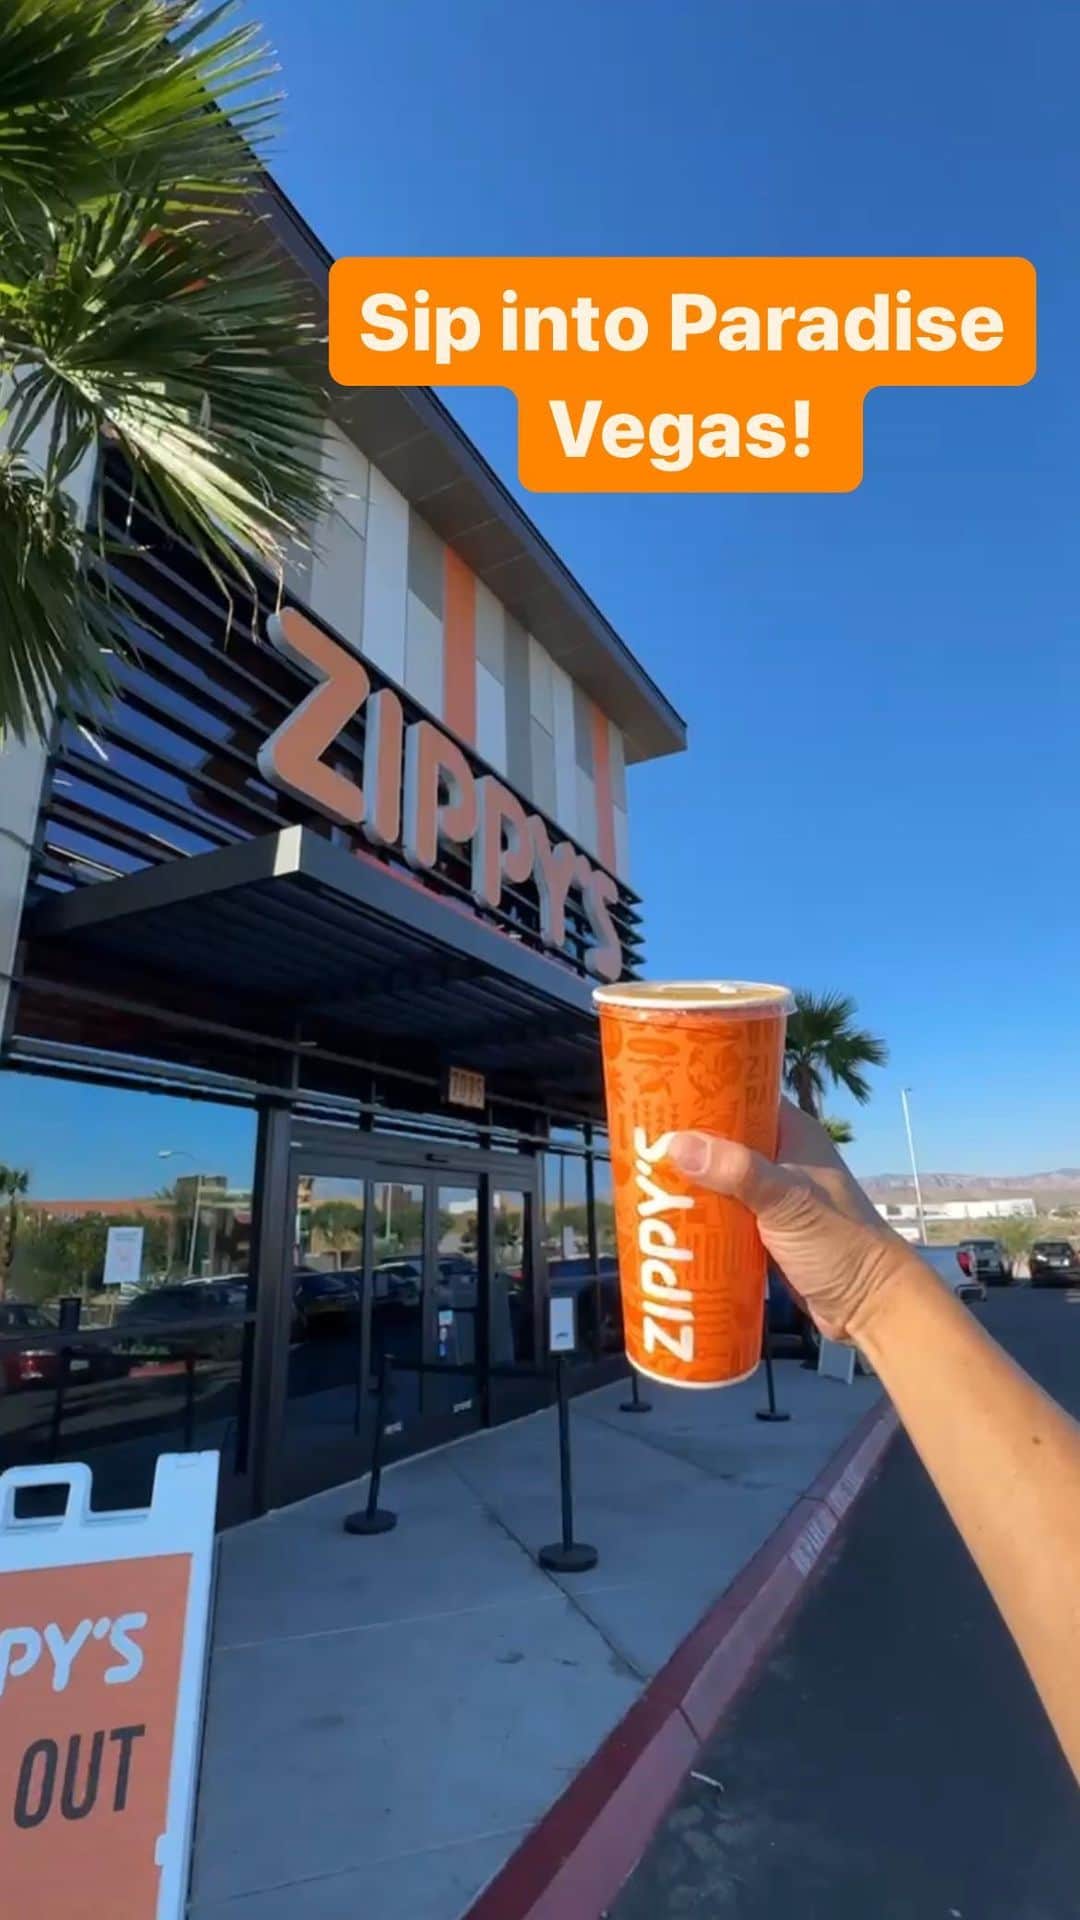 Zippy's Restaurantsのインスタグラム：「🌴 Exciting News Las Vegas Ohana! 🎉 Our partnership with Zippy’s Restaurant has expanded to Las Vegas! Now, not only can you savor Zippy’s iconic dishes, but you can also enjoy our Harders signature Liliko’i and Fruit Punch fountain drinks at their new Las Vegas location. Our Liliko’i is a tropical paradise in a cup, bursting with the bold, tangy flavor of passion fruit. As for our Fruit Punch, it’s a delightful medley of inspired island fruit flavors, refreshing with every sip. 🌺 Made with Only the Best: These drinks are crafted with genuine cane sugar and real fruit, bringing you the authentic flavors of Hawaii in every refreshing glass. We’re incredibly proud to continue our long-standing partnership with Zippy’s as they bring a taste of the islands to Las Vegas.🤙🏽」